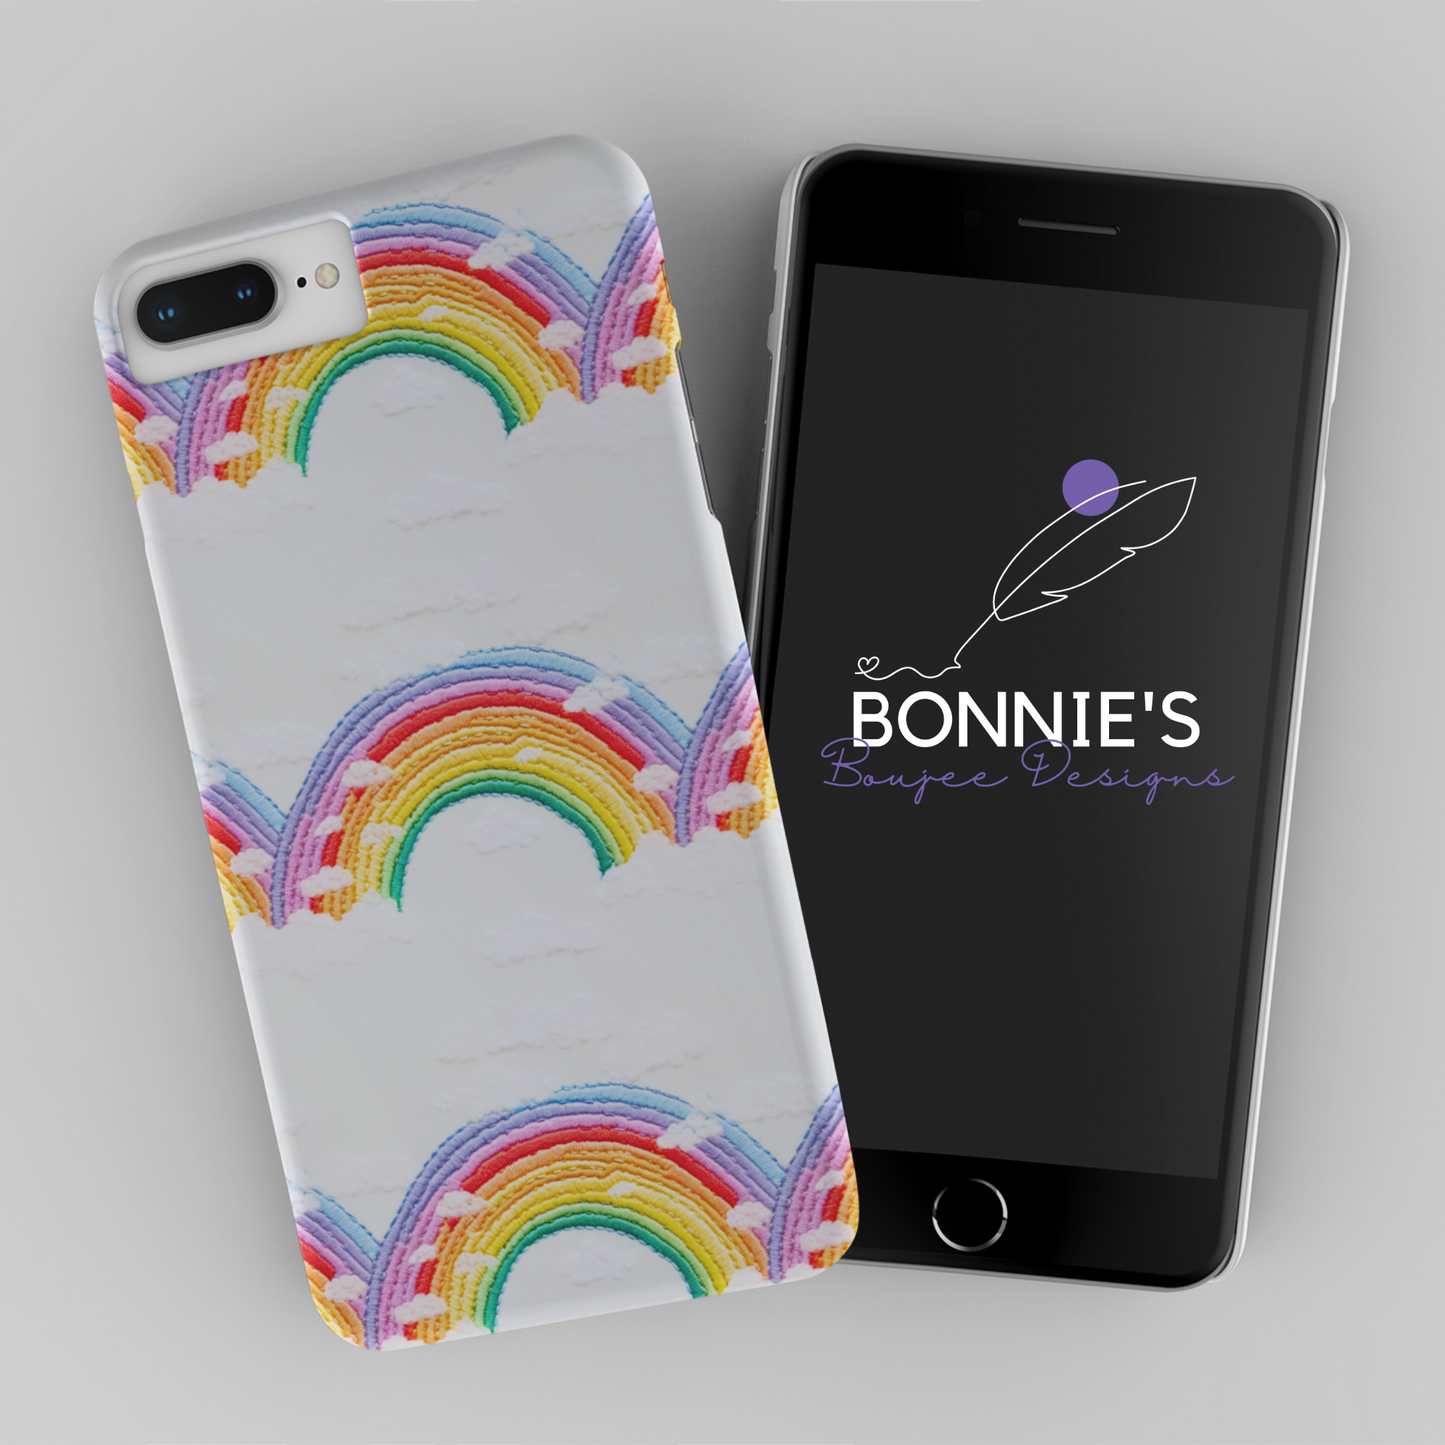 Rainbow and Clouds on White Embroidery Seamless Design